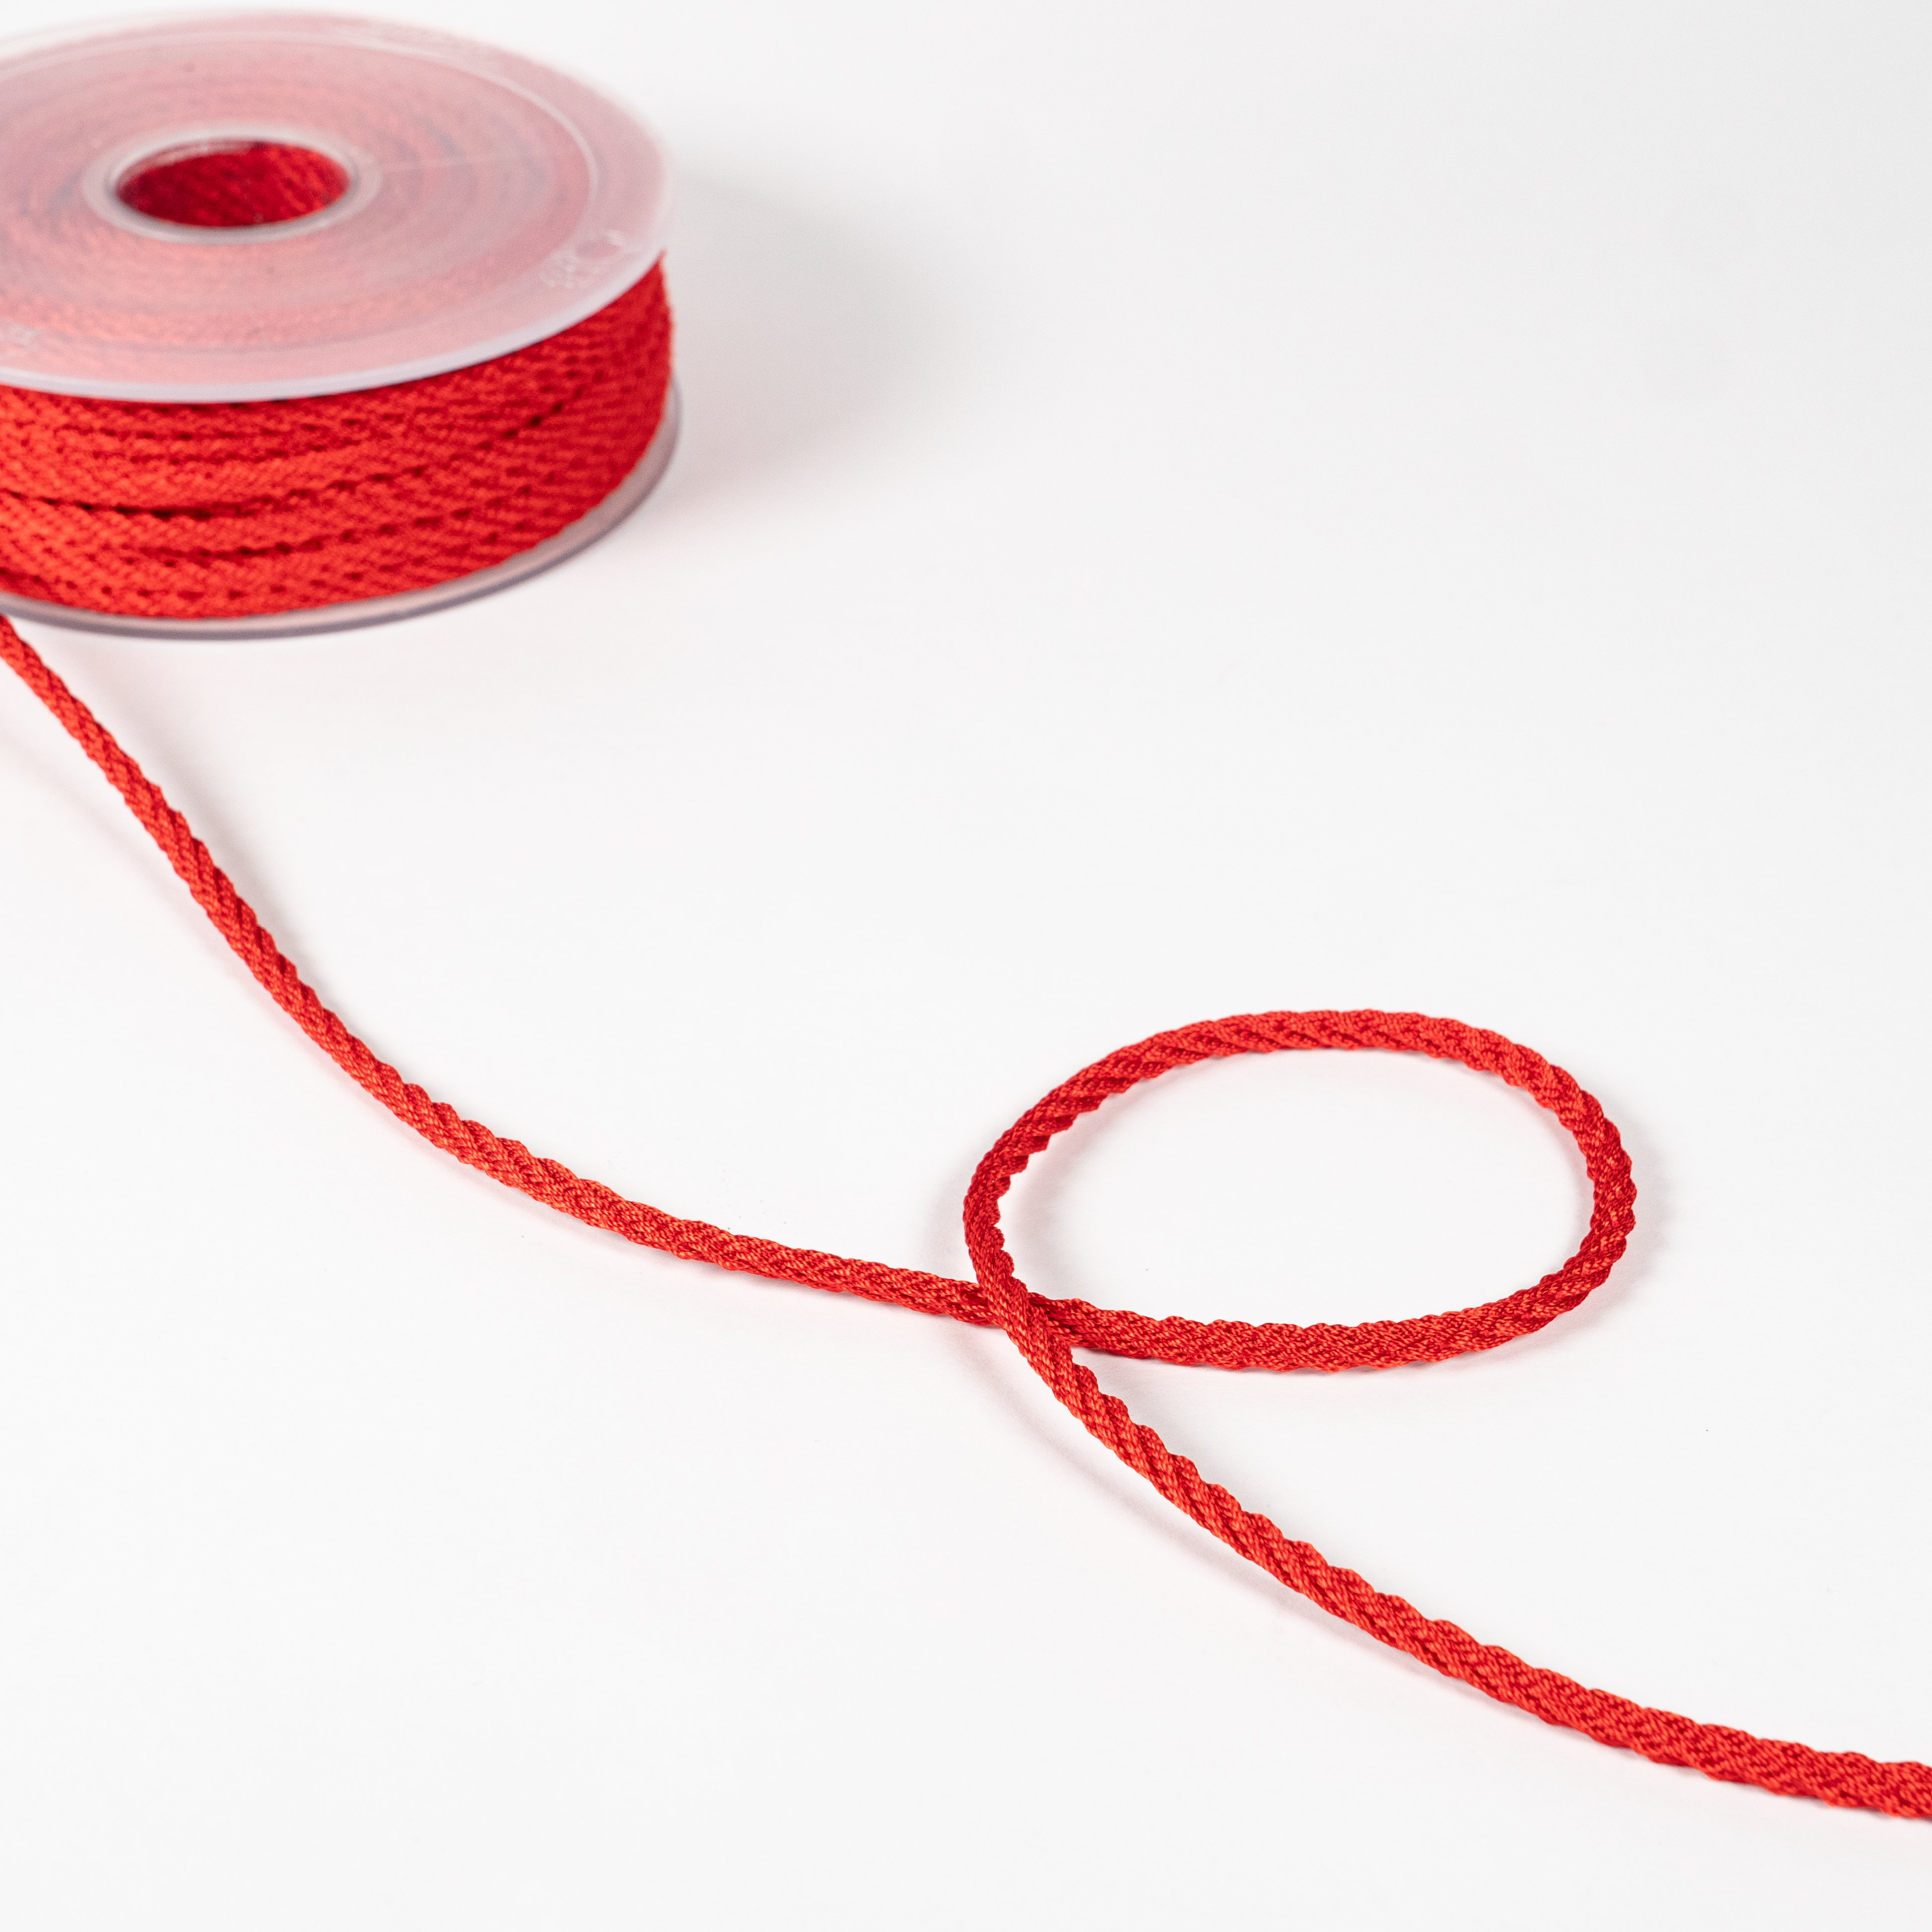 4MM RAYON SILK CREPE CORD 20M RED 118